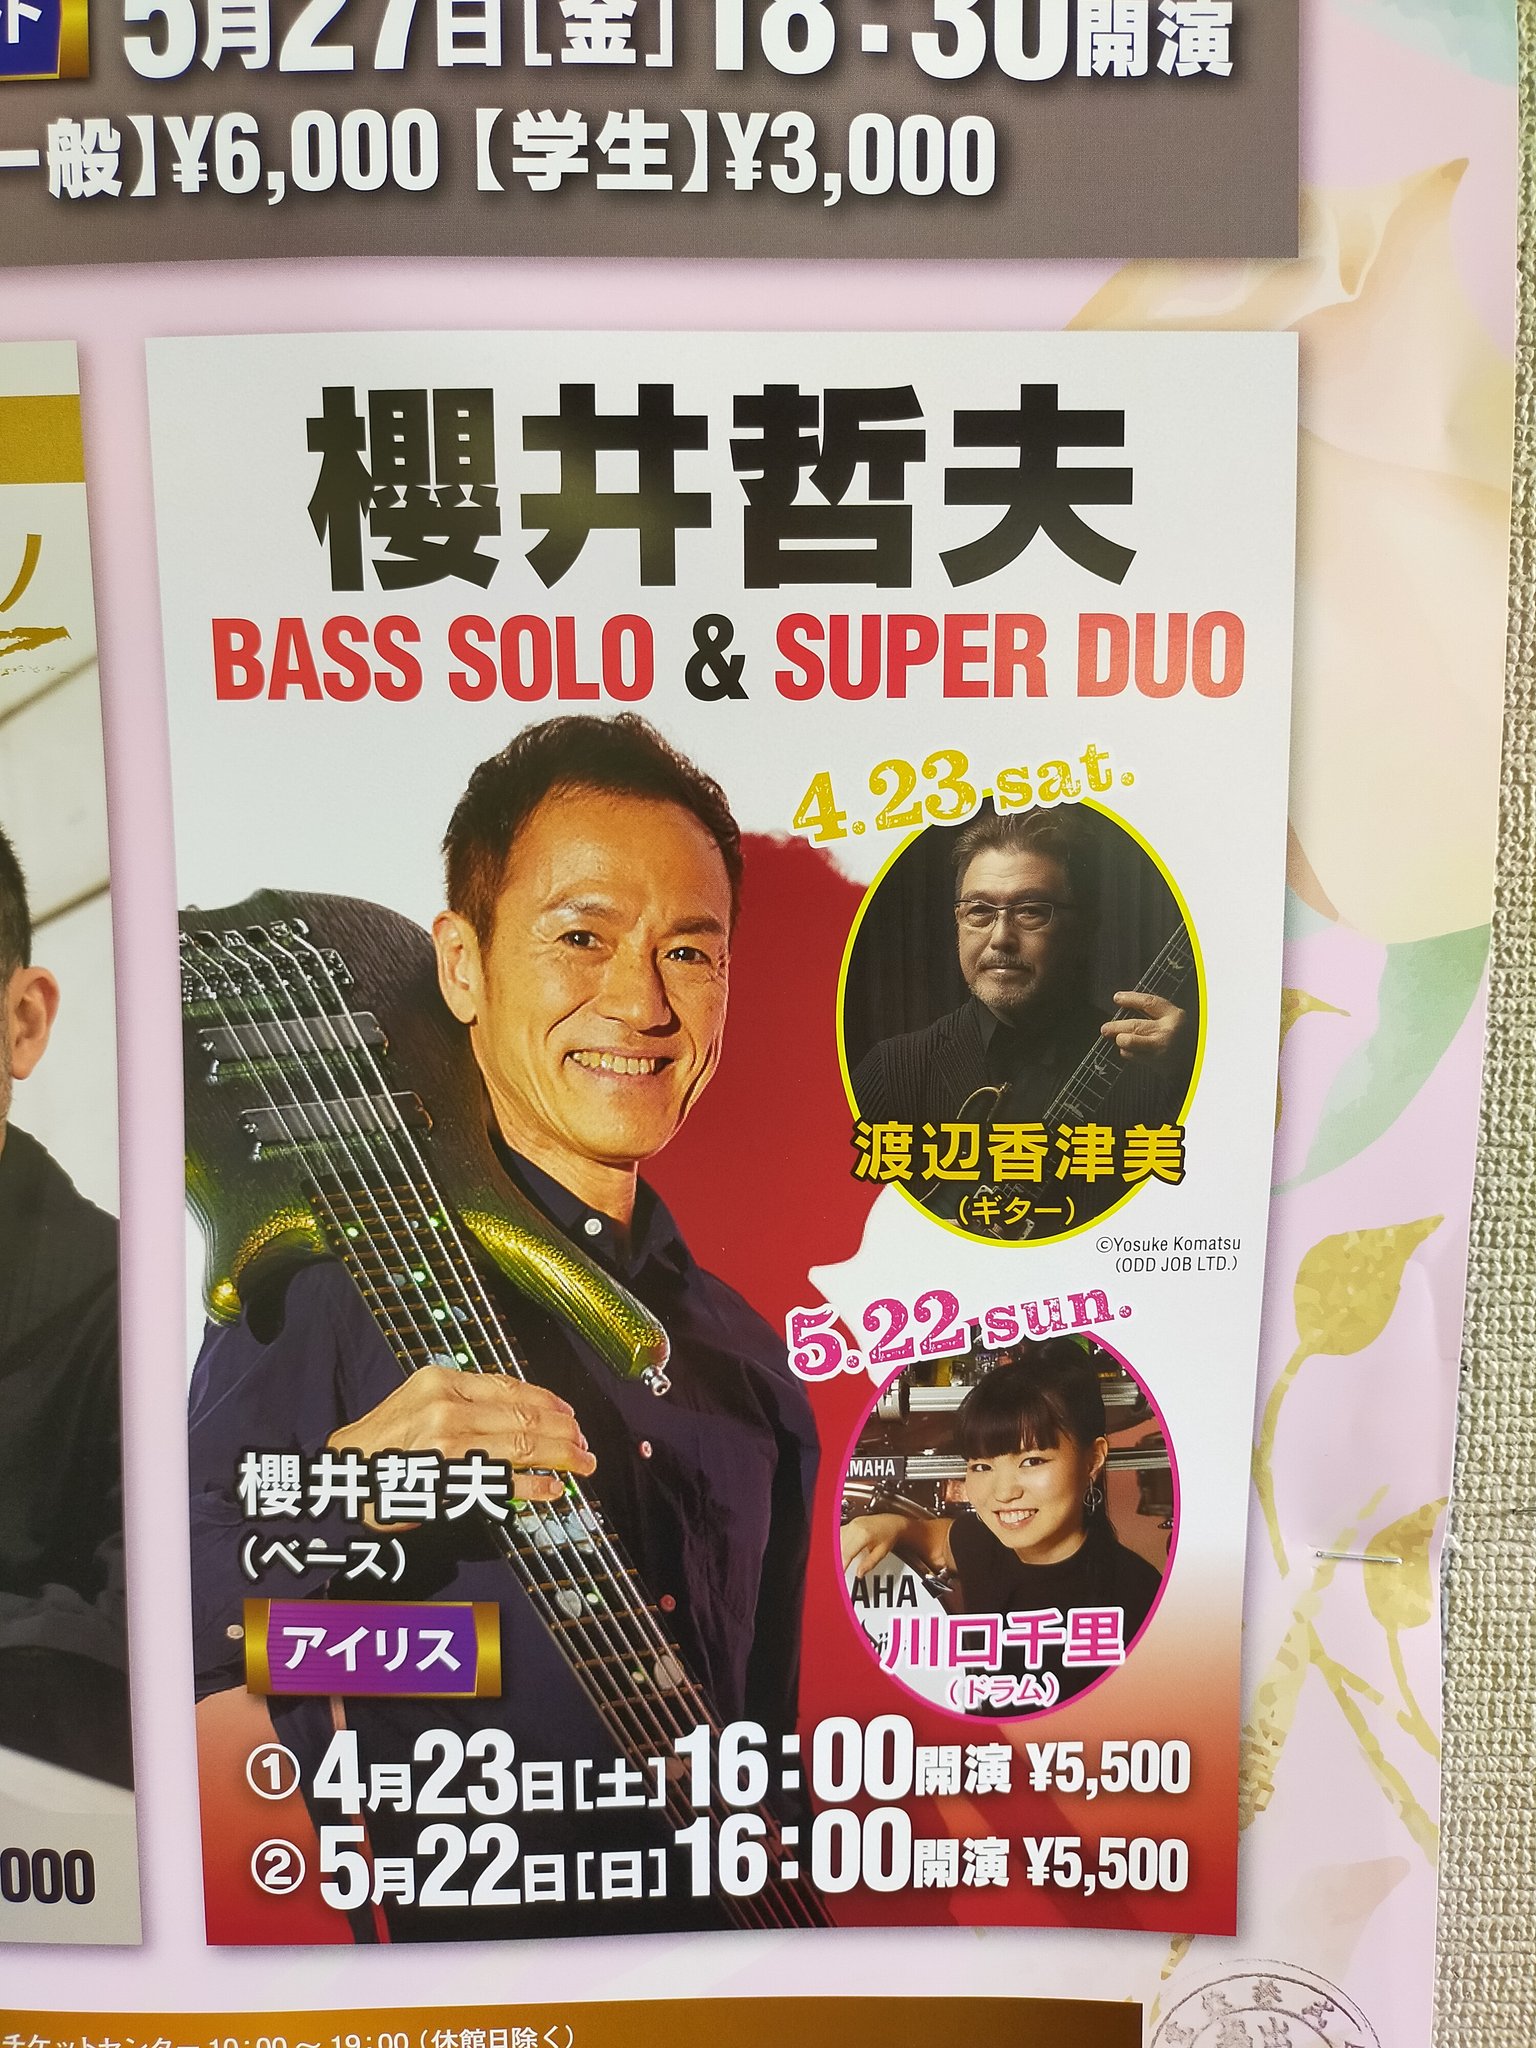 All of takanakaðð on i saw this poster at the station on my way to work it seems that tetsuo sakurai and kazumi watanabe will perform live at a concert venue